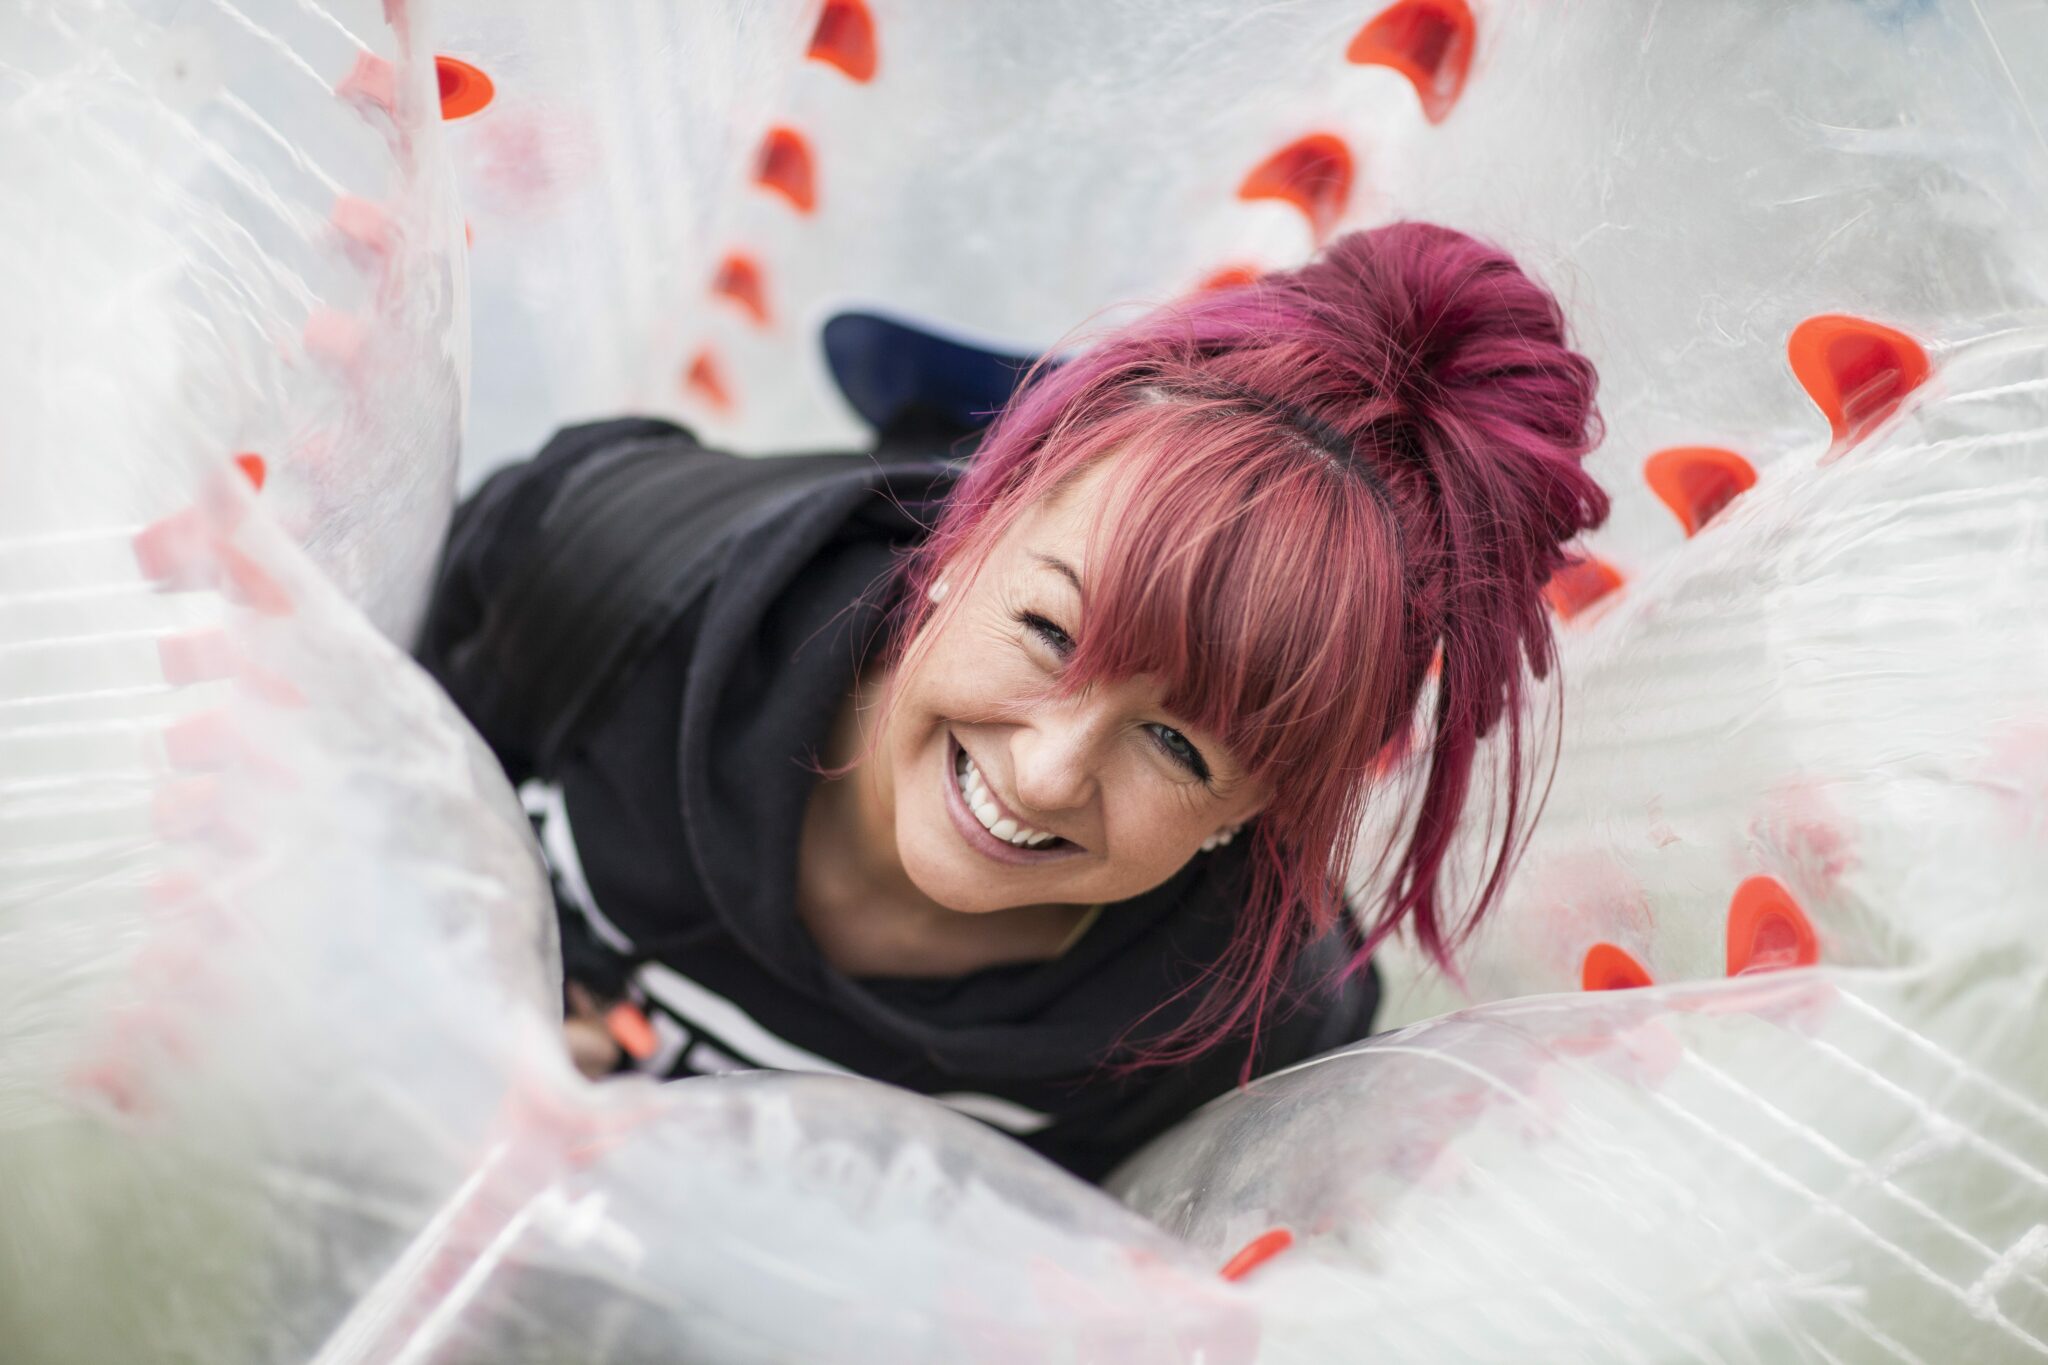 Bubble Football Event - Woman Laughing